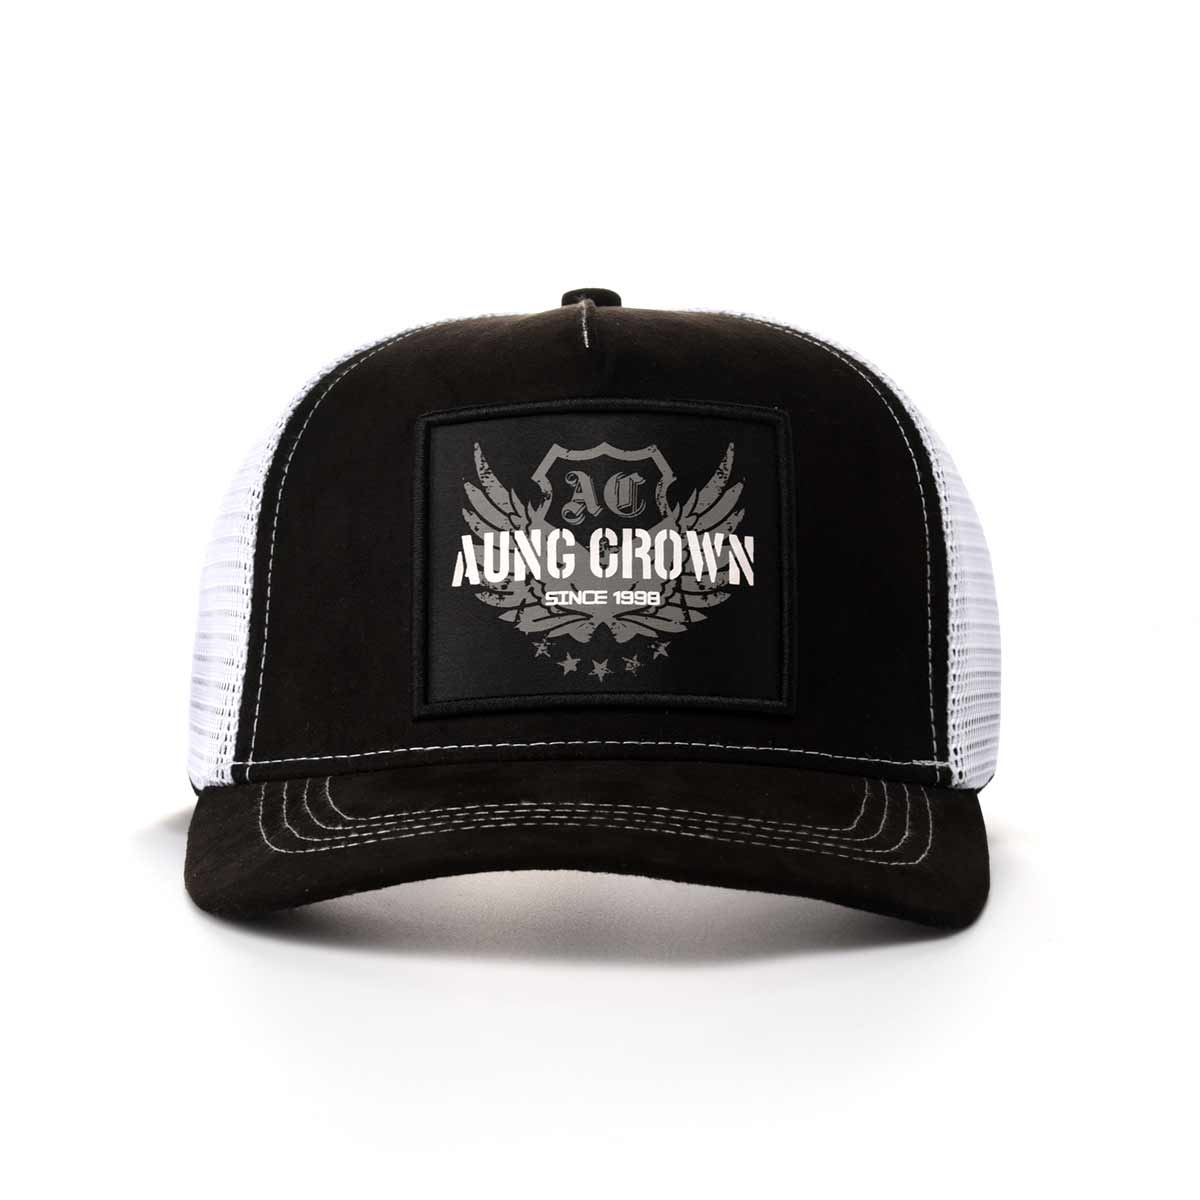 Aung Crown black-white baseball trucker hat with a curved brim SFA-210415-2